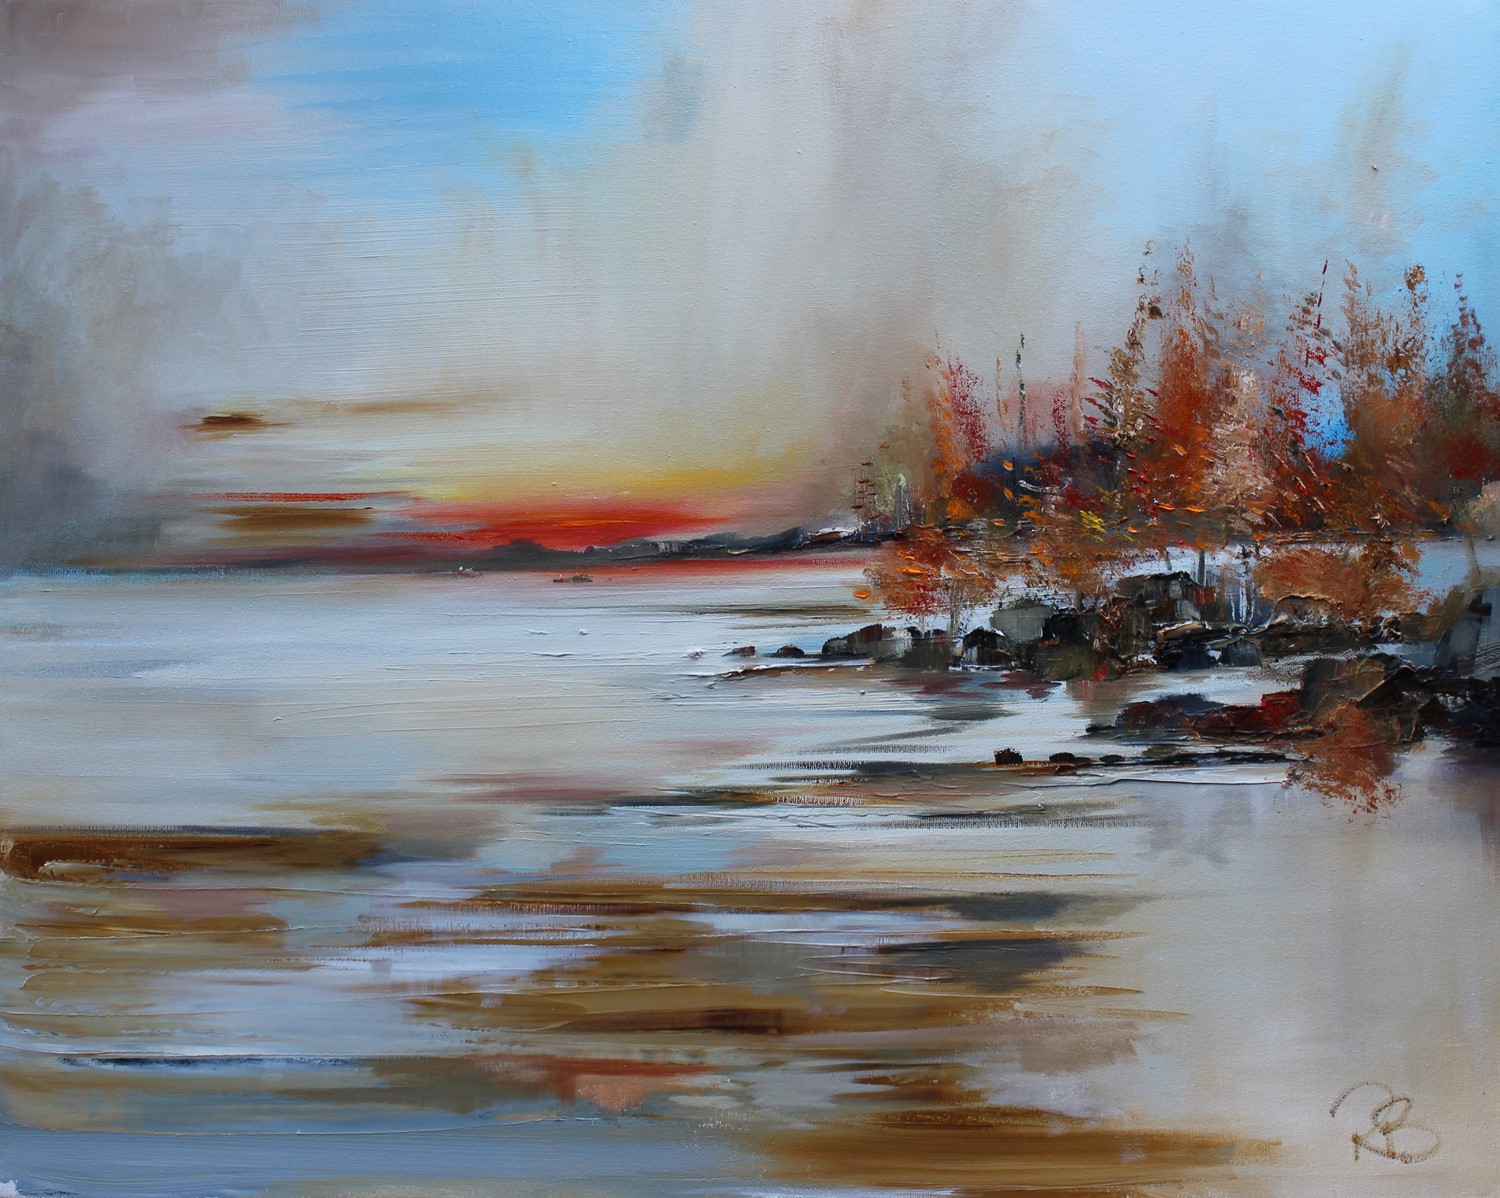 'Autumn By the Shore' by artist Rosanne Barr